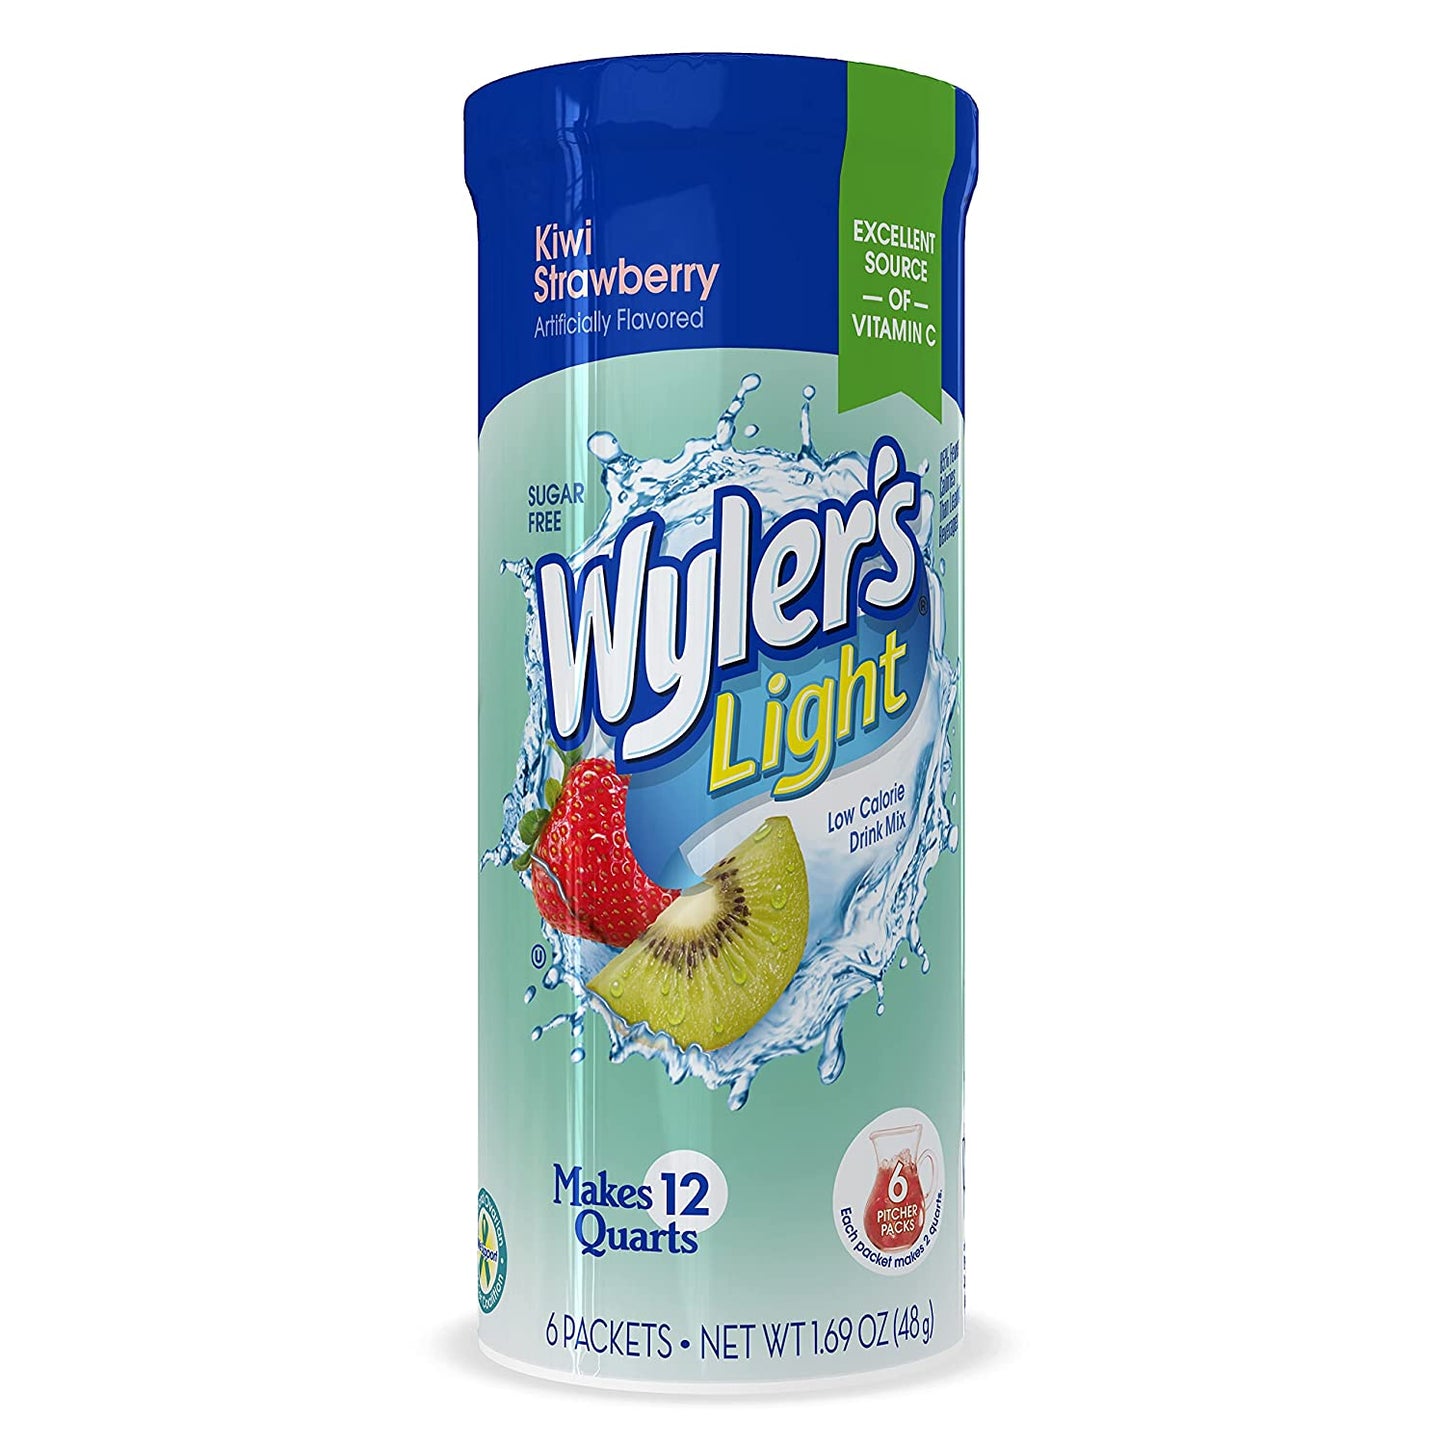 Wyler's Light Canister Drink Mix - Kiwi Strawberry Water Powder Enhancer Canister (6 Canisters that make 12 Quarts Each)